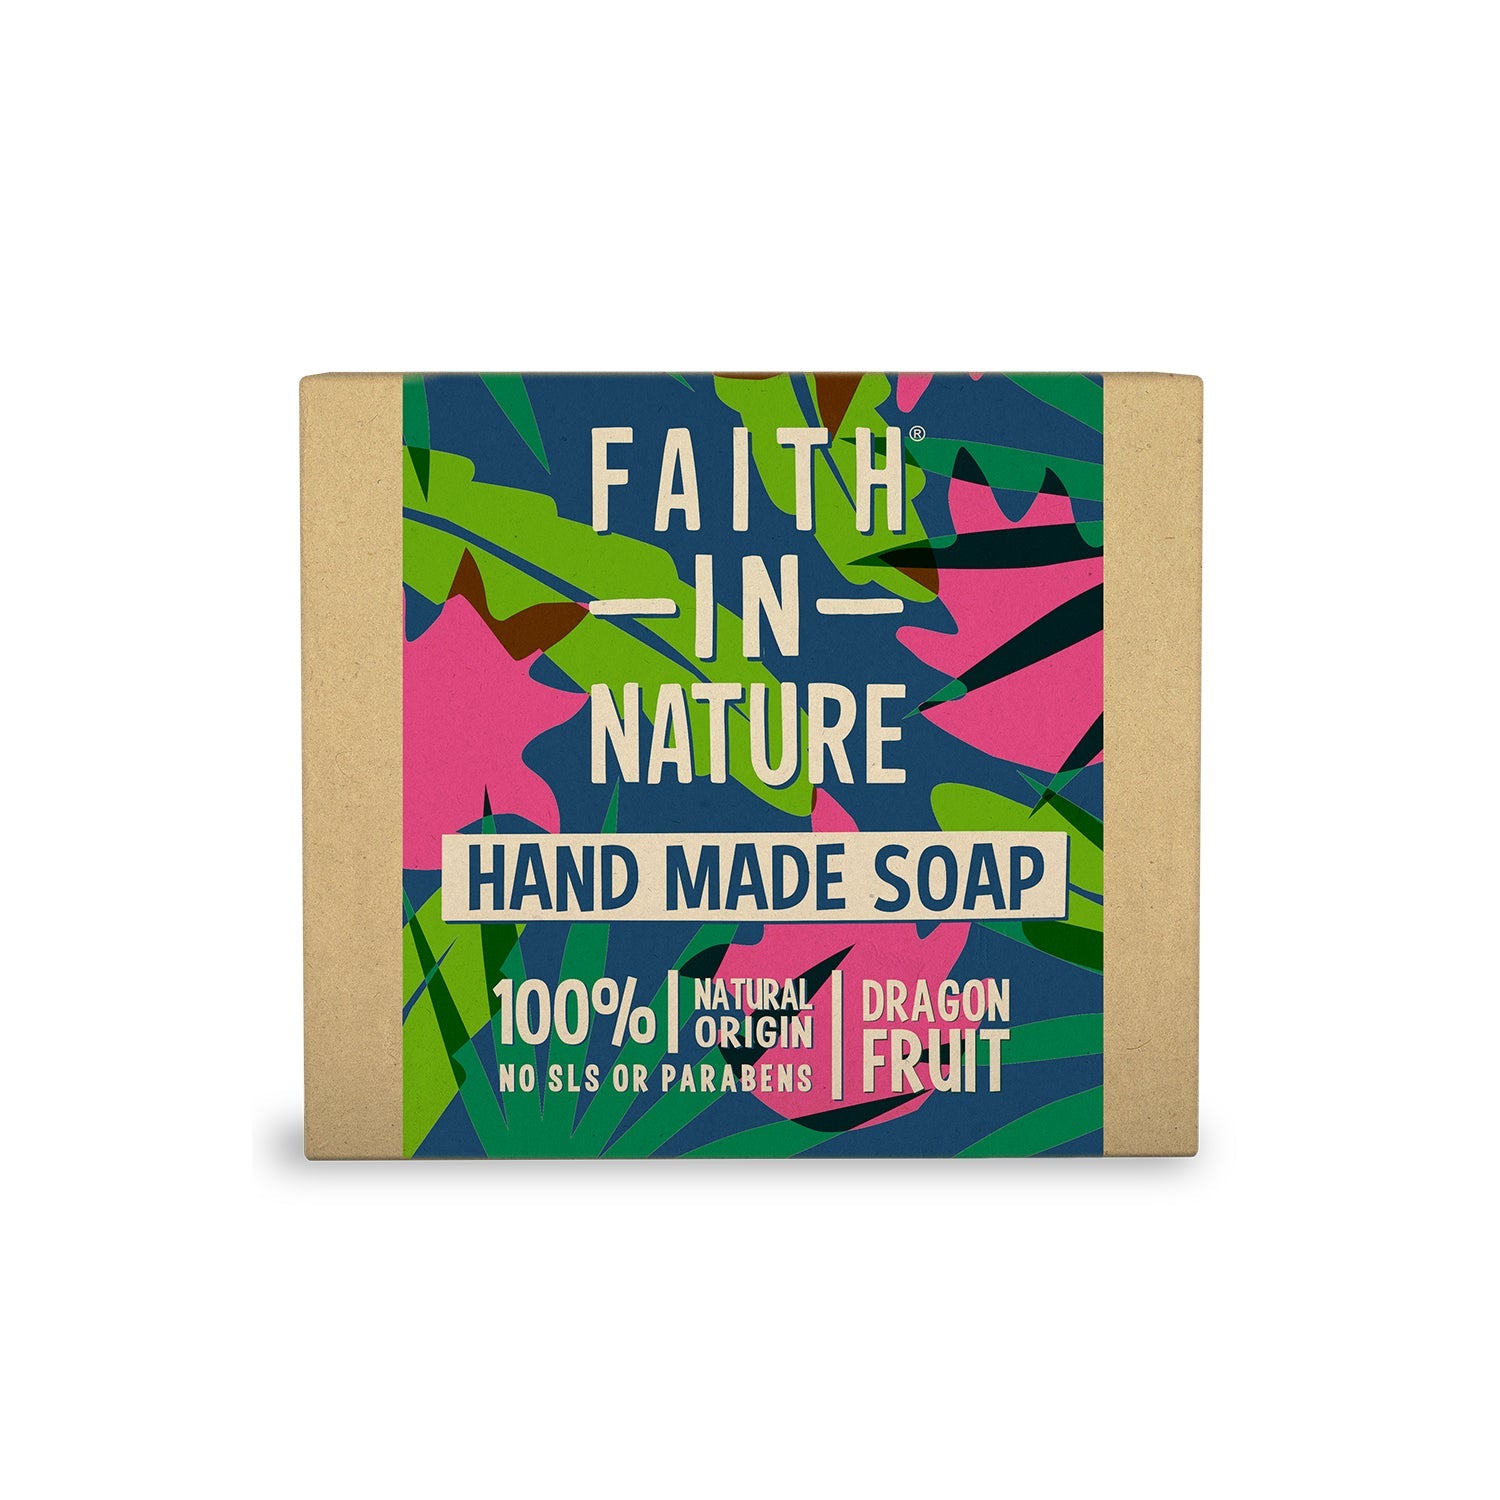 Faith in Nature Boxed Soap 100g - Dragon Fruit